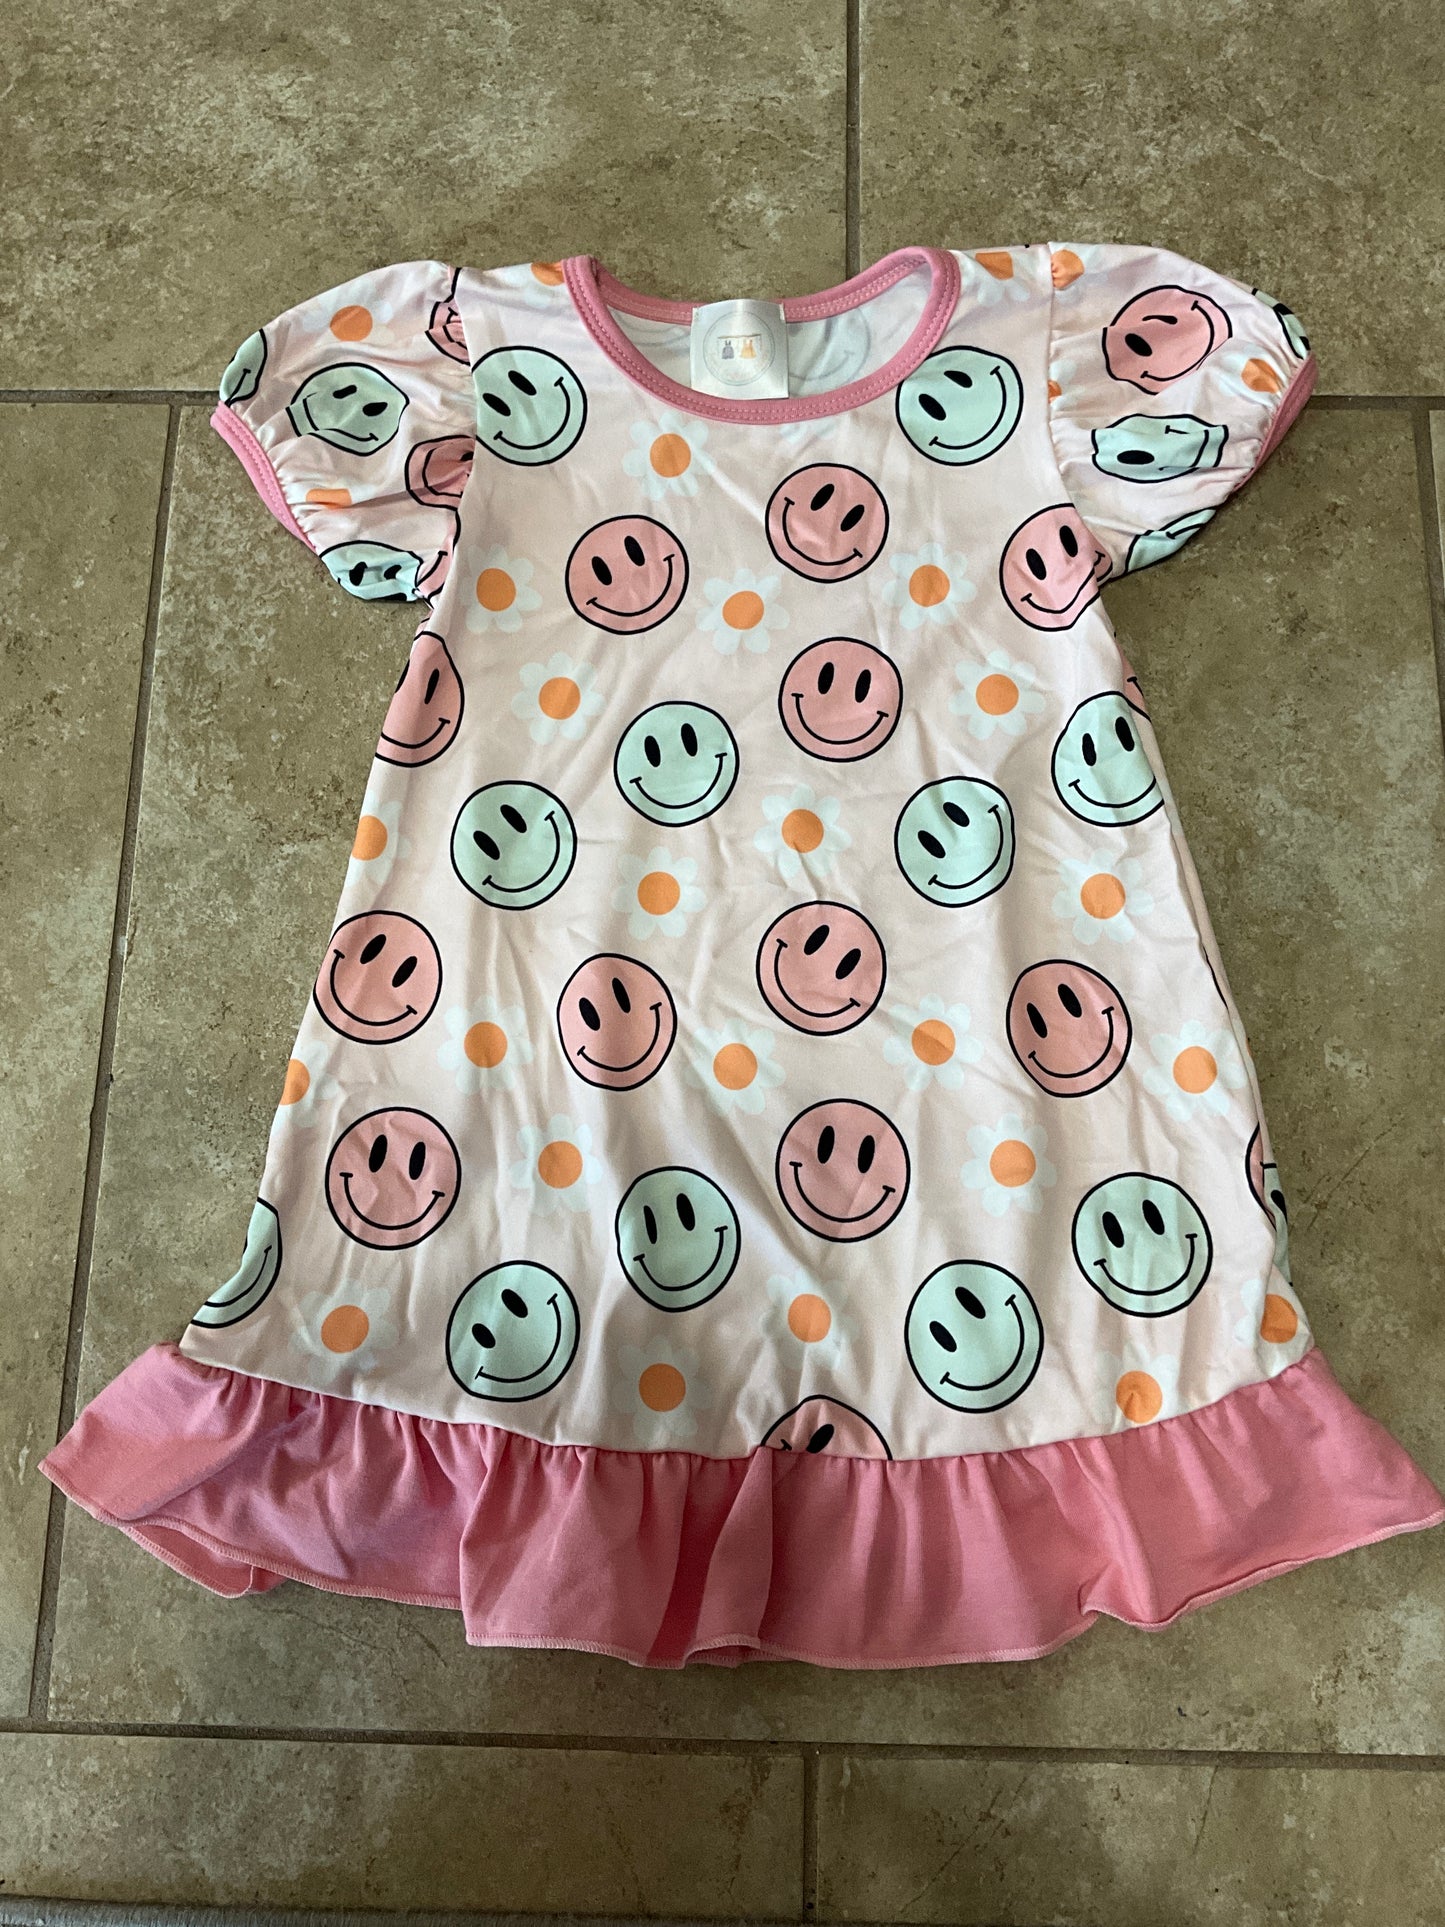 Rts- smiley face nightgown